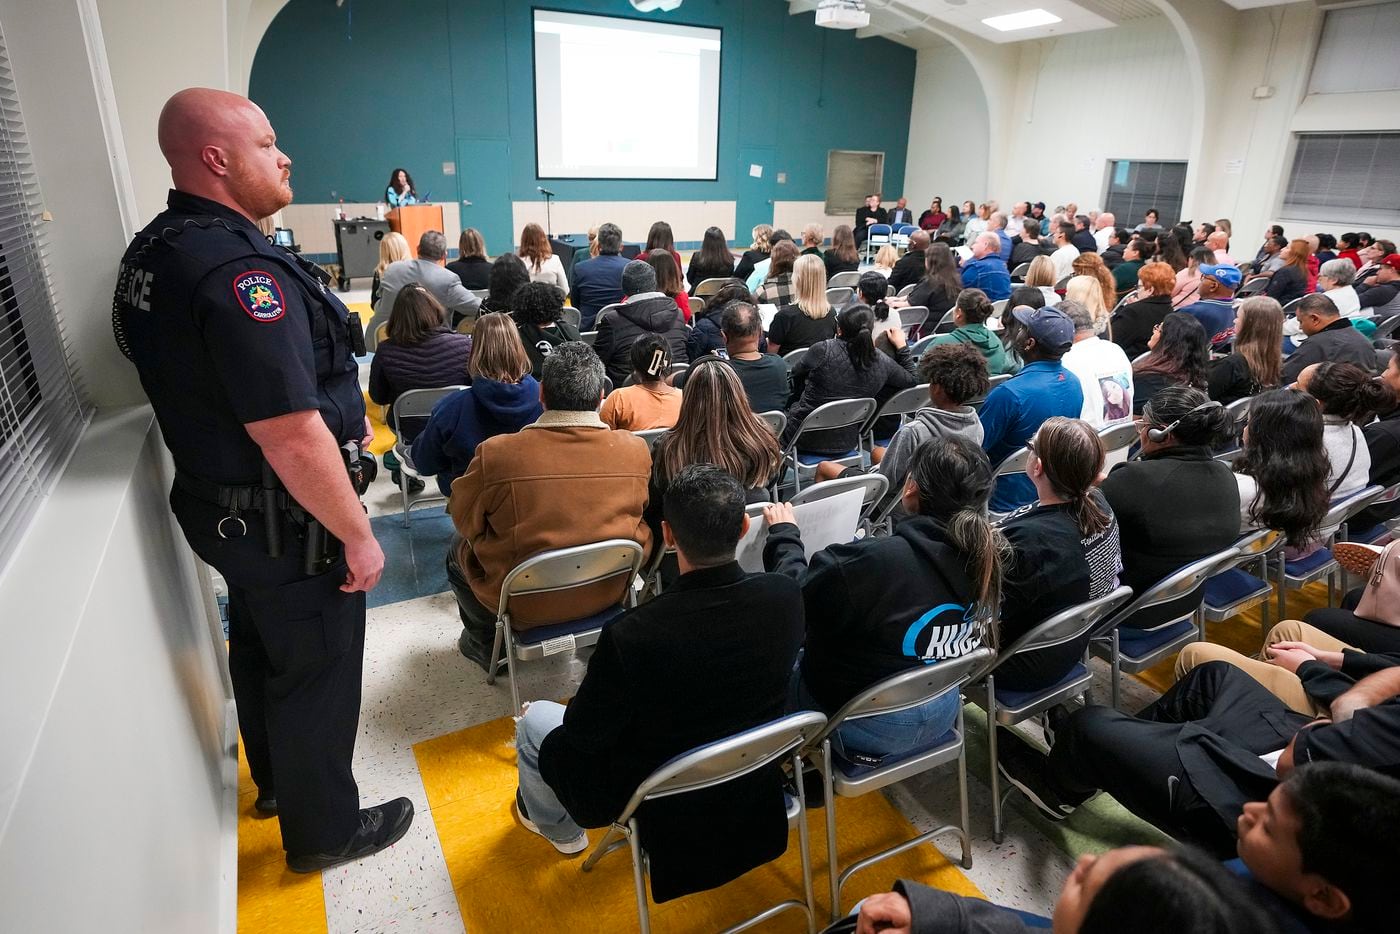 A Carrollton police officer stands to the side of the room during a Student Health Advisory...